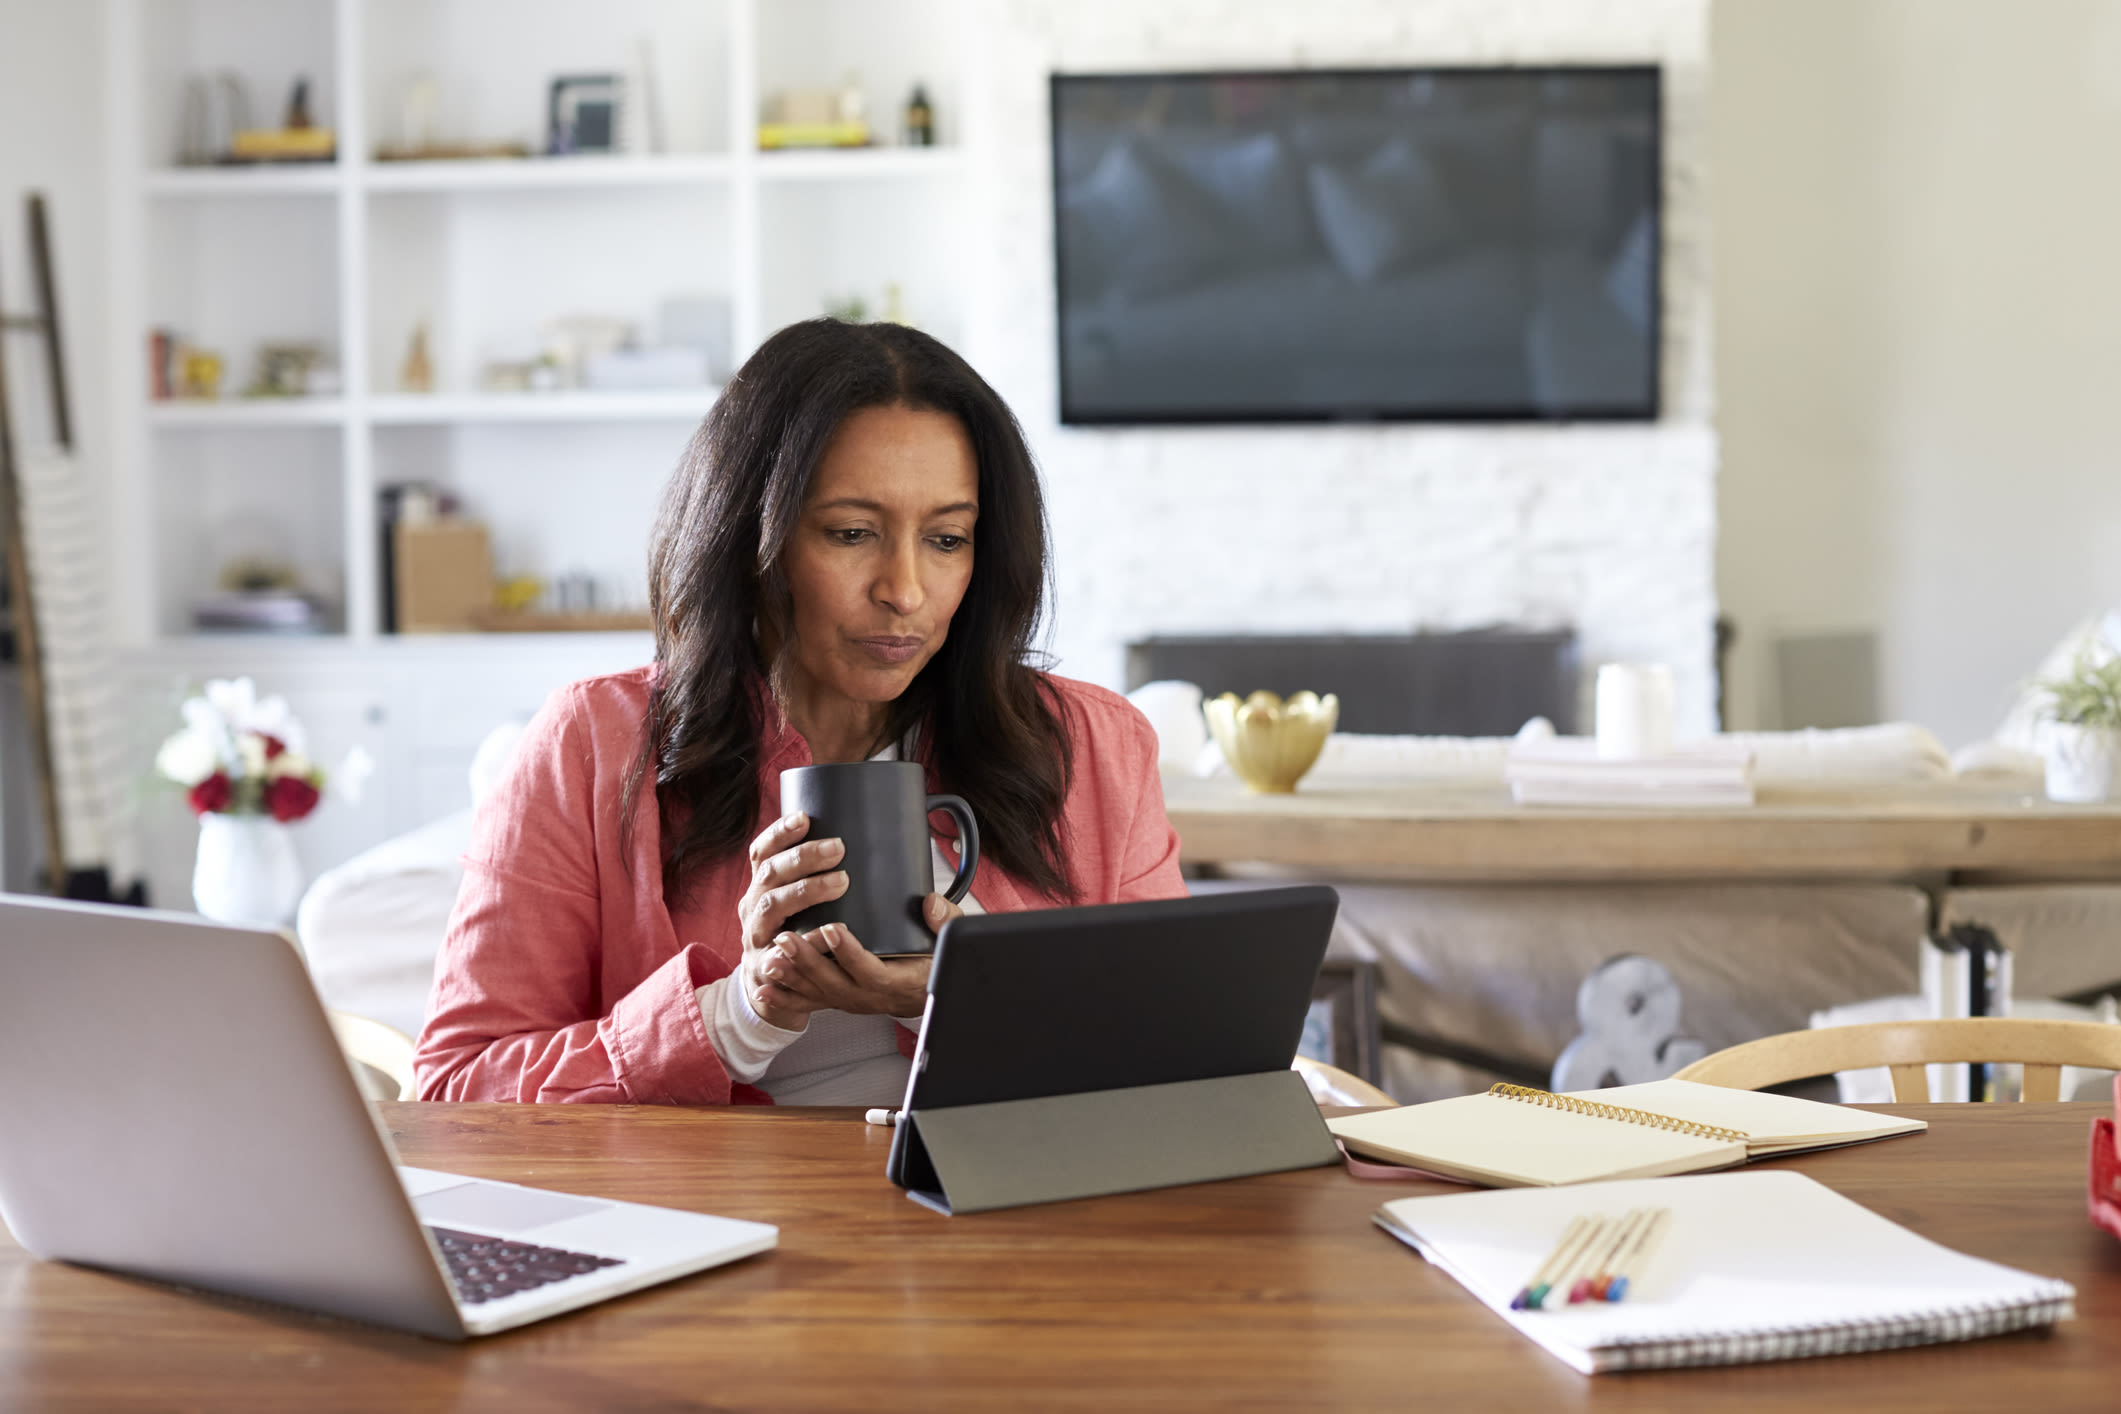 A woman working at home, holding a mug and looking at a tablet